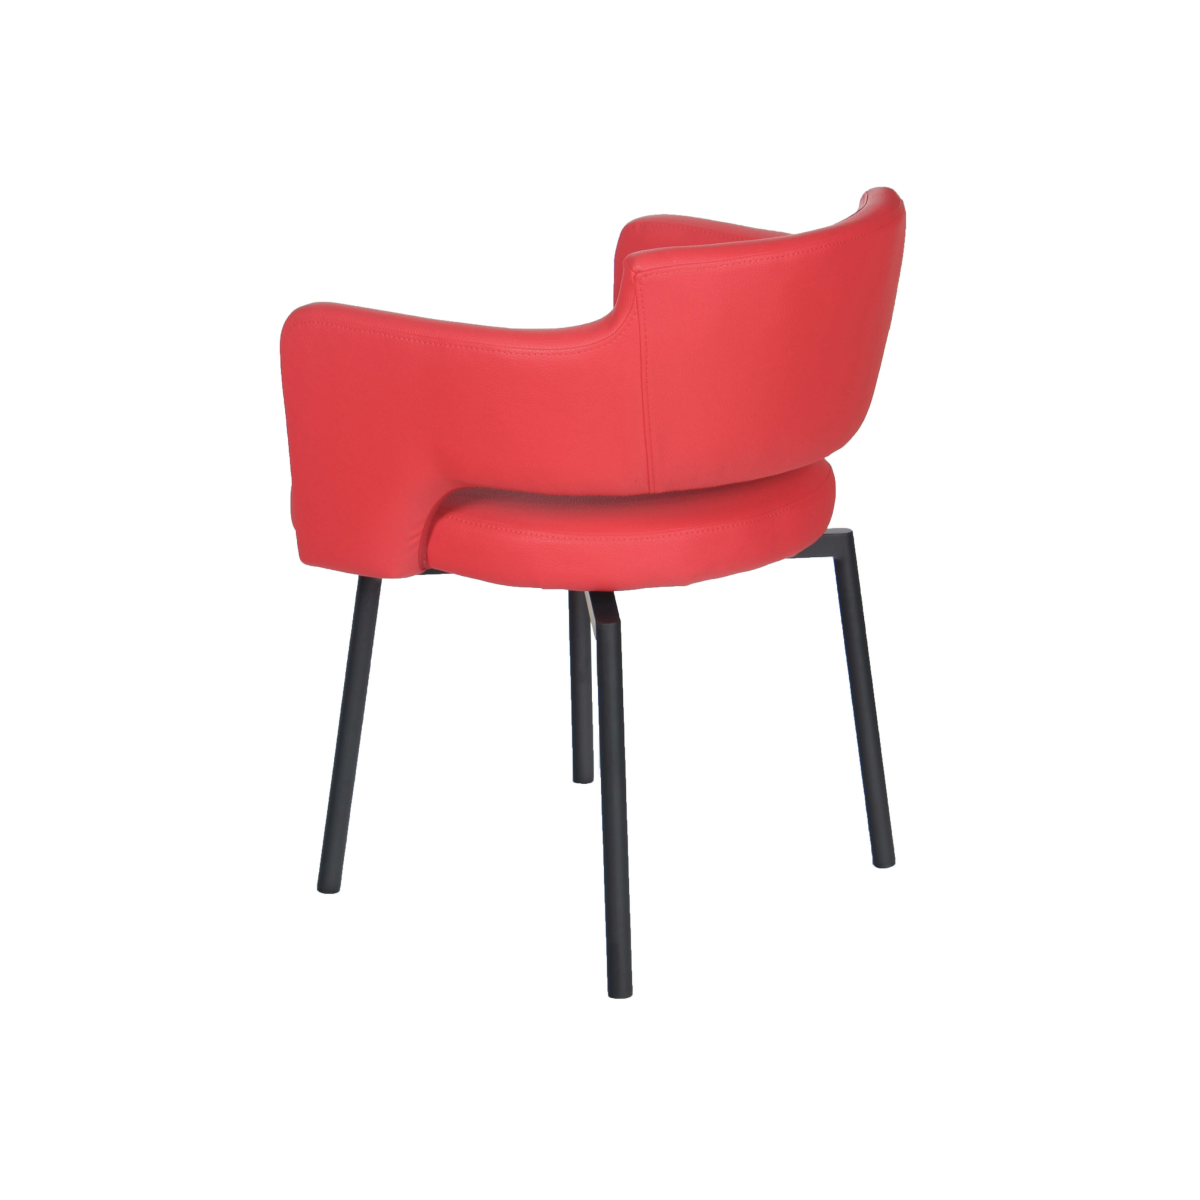 Chaise avec accoudoirs rouges ELYSEE